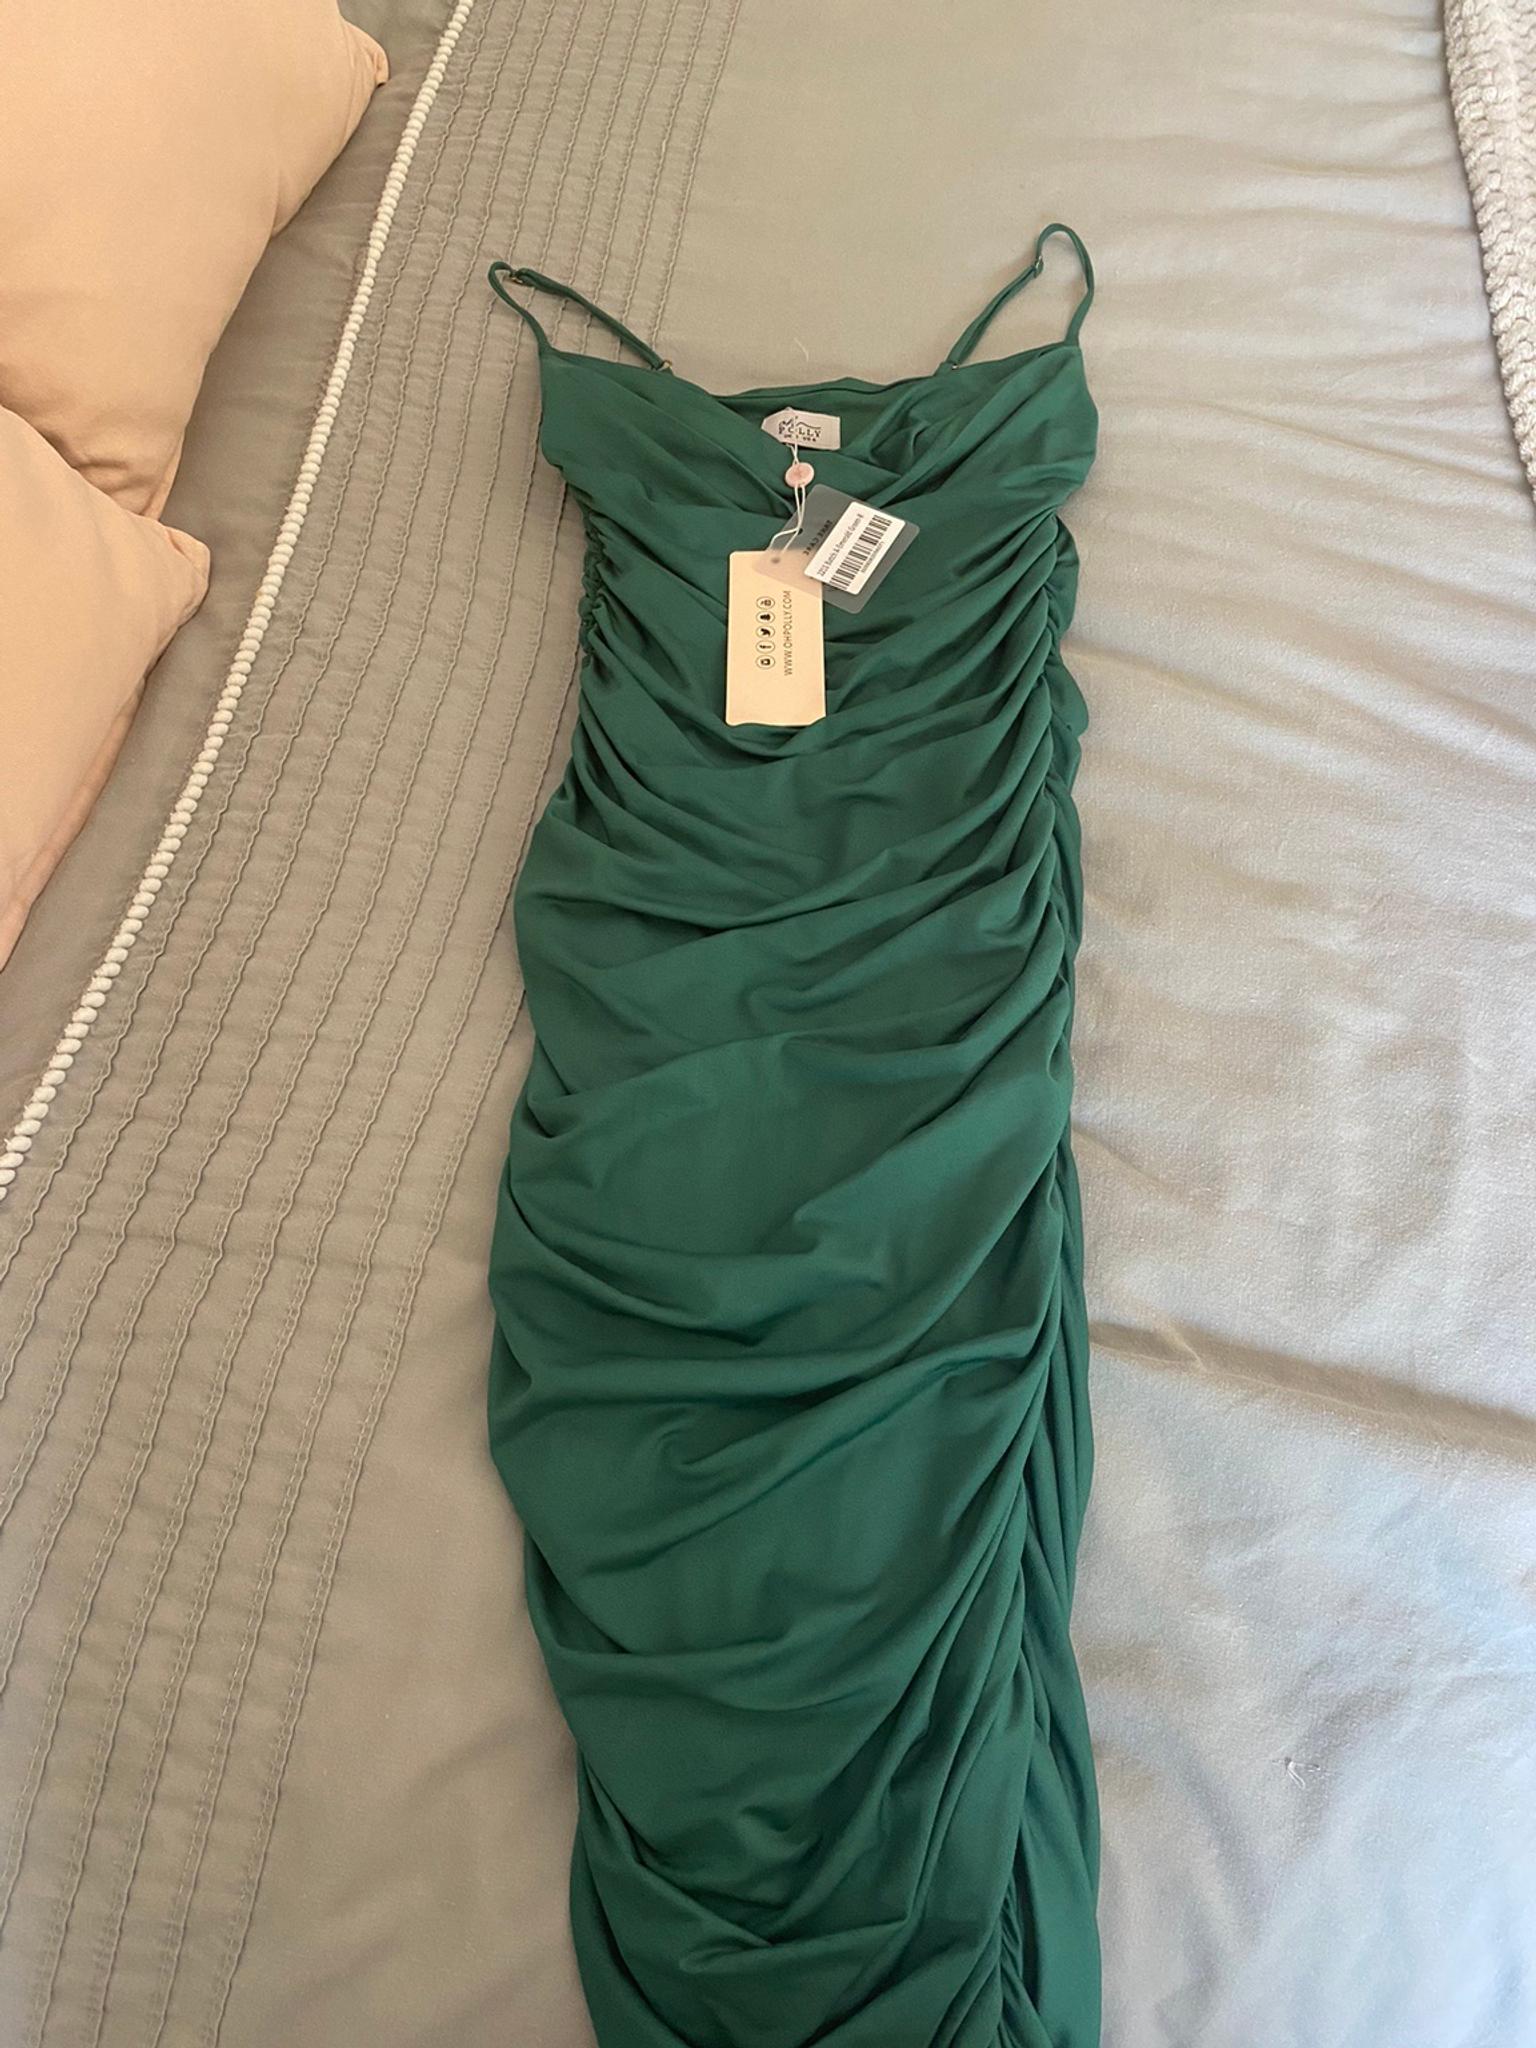 Oh Polly green midi dress size 8- brand new in GU31 Hampshire for £30.